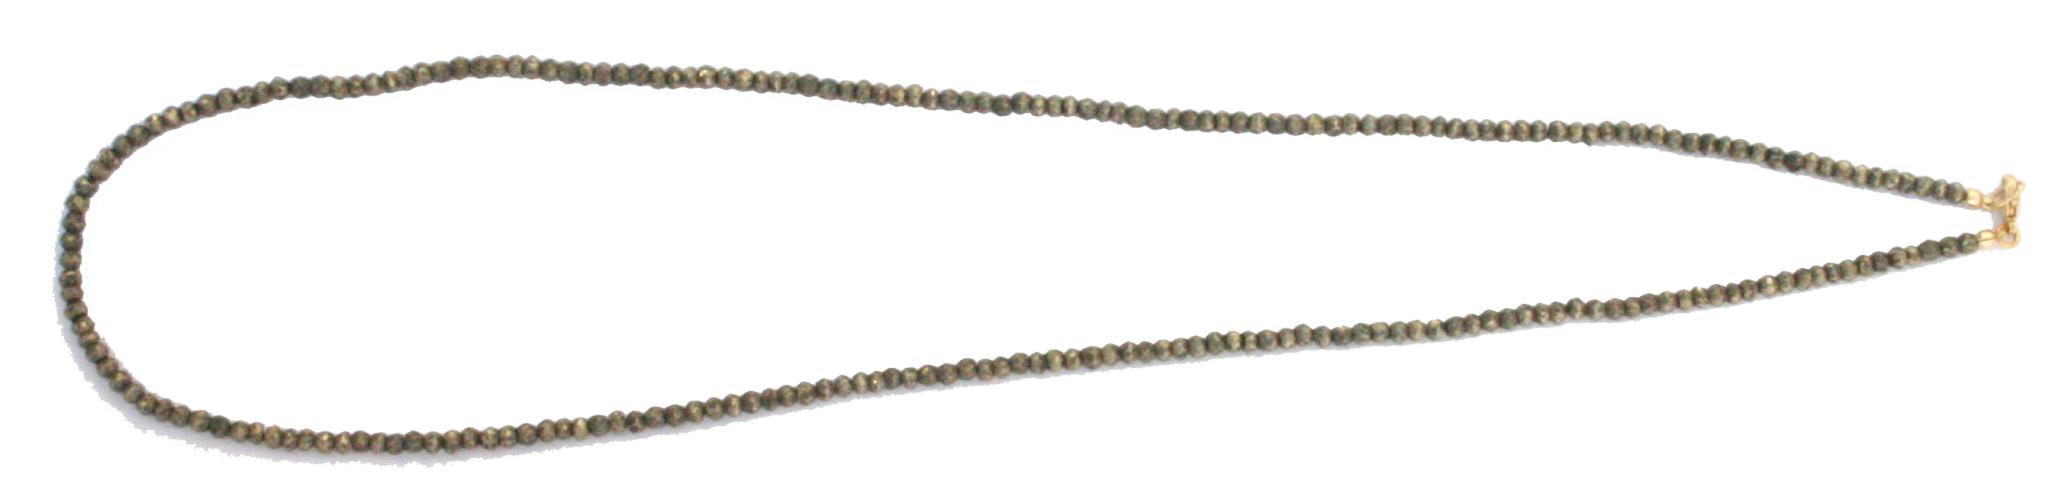 6-3-292 3mm faceted pyrite necklace by Ross Coppelman